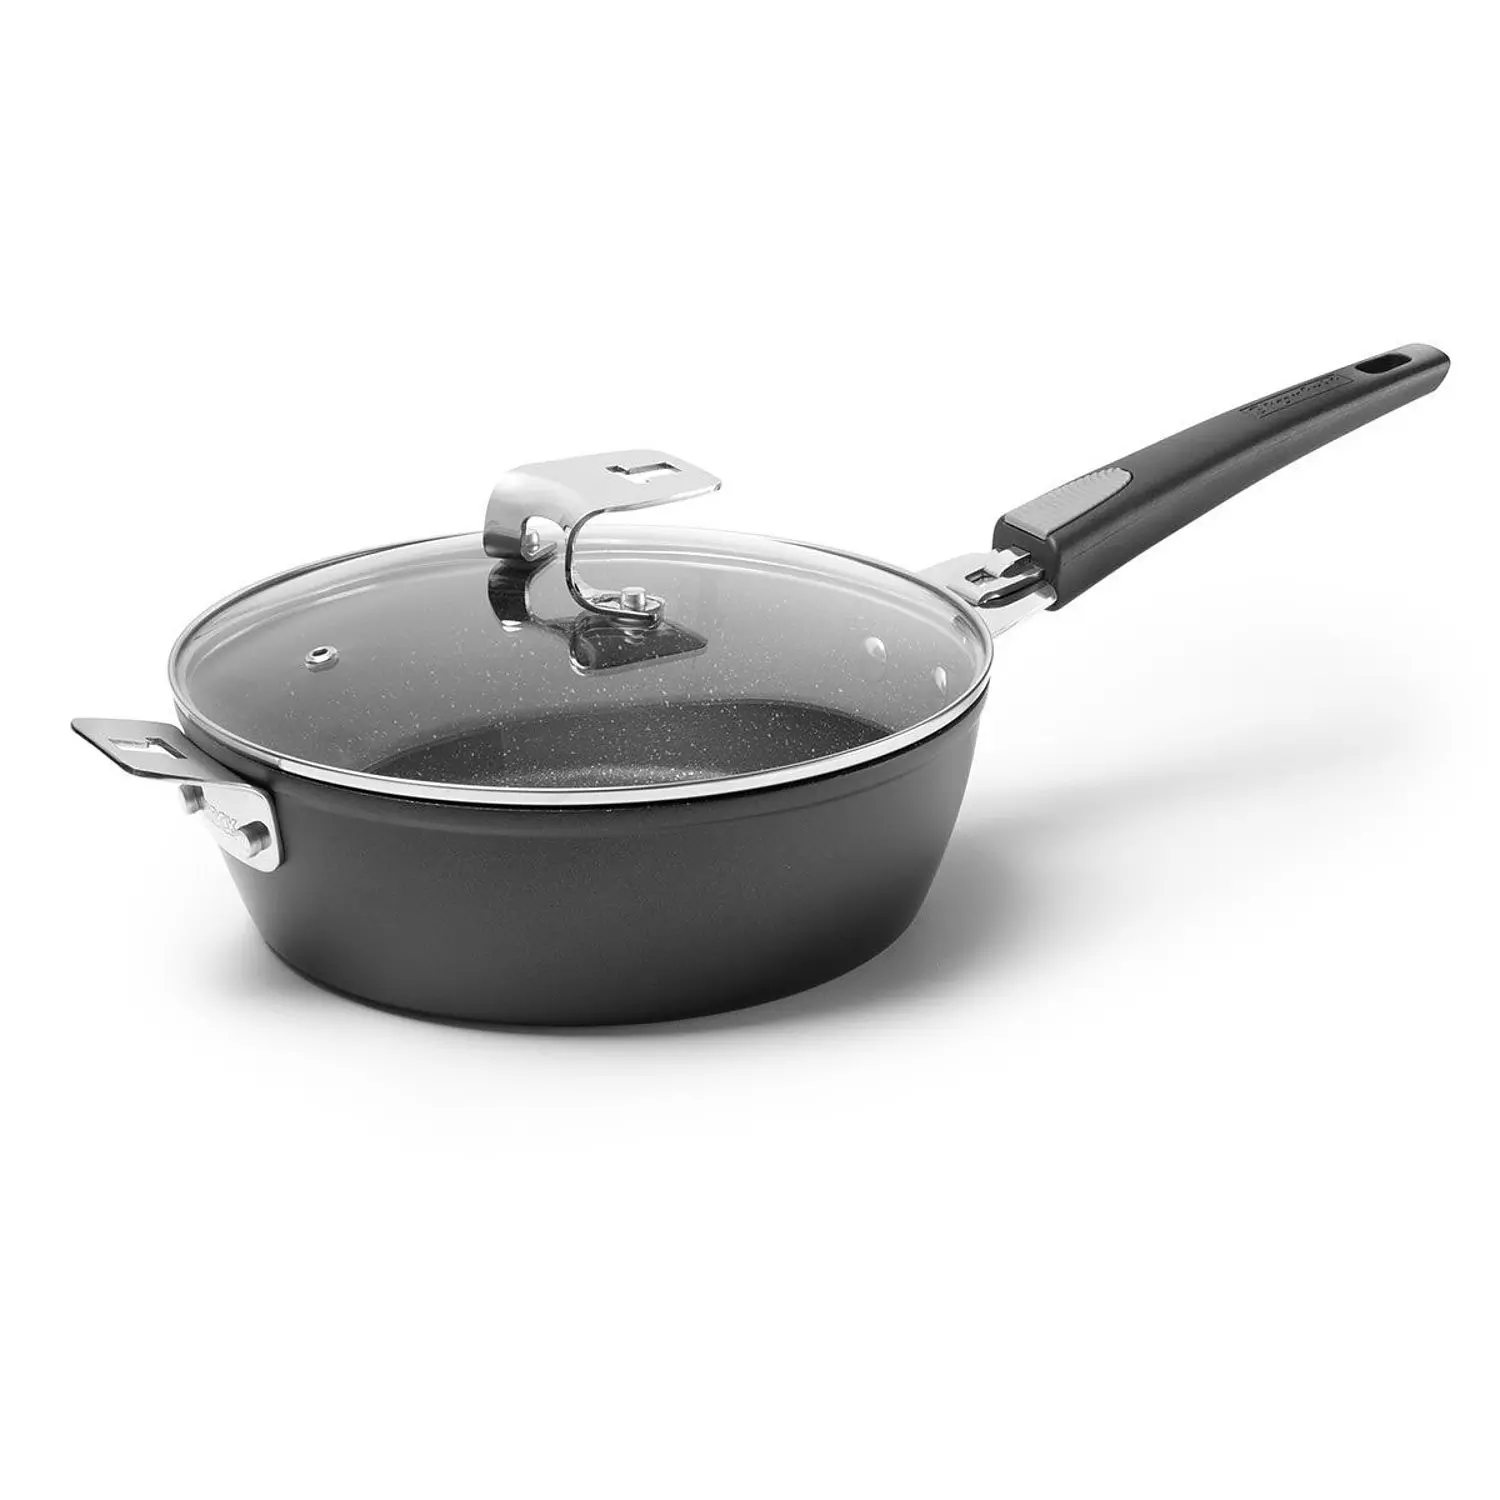 Starfrit - The Rock deep fry pan / dutch oven with lid and detachable handle, 9"